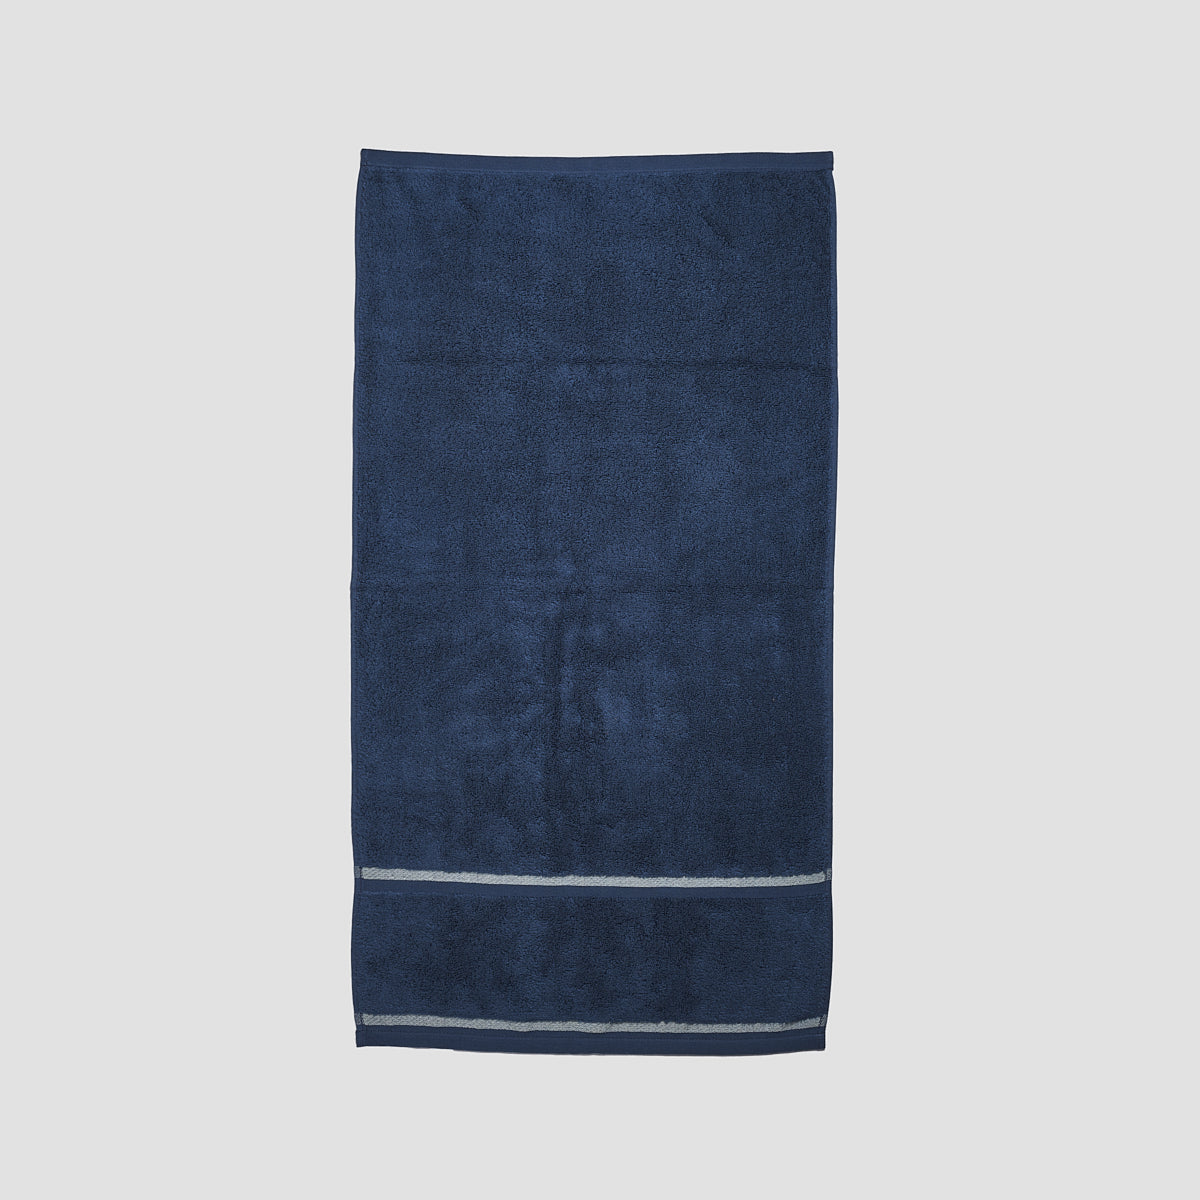 Moonlit Blue Cotton Towels Size Hand Towel by Piglet in Bed